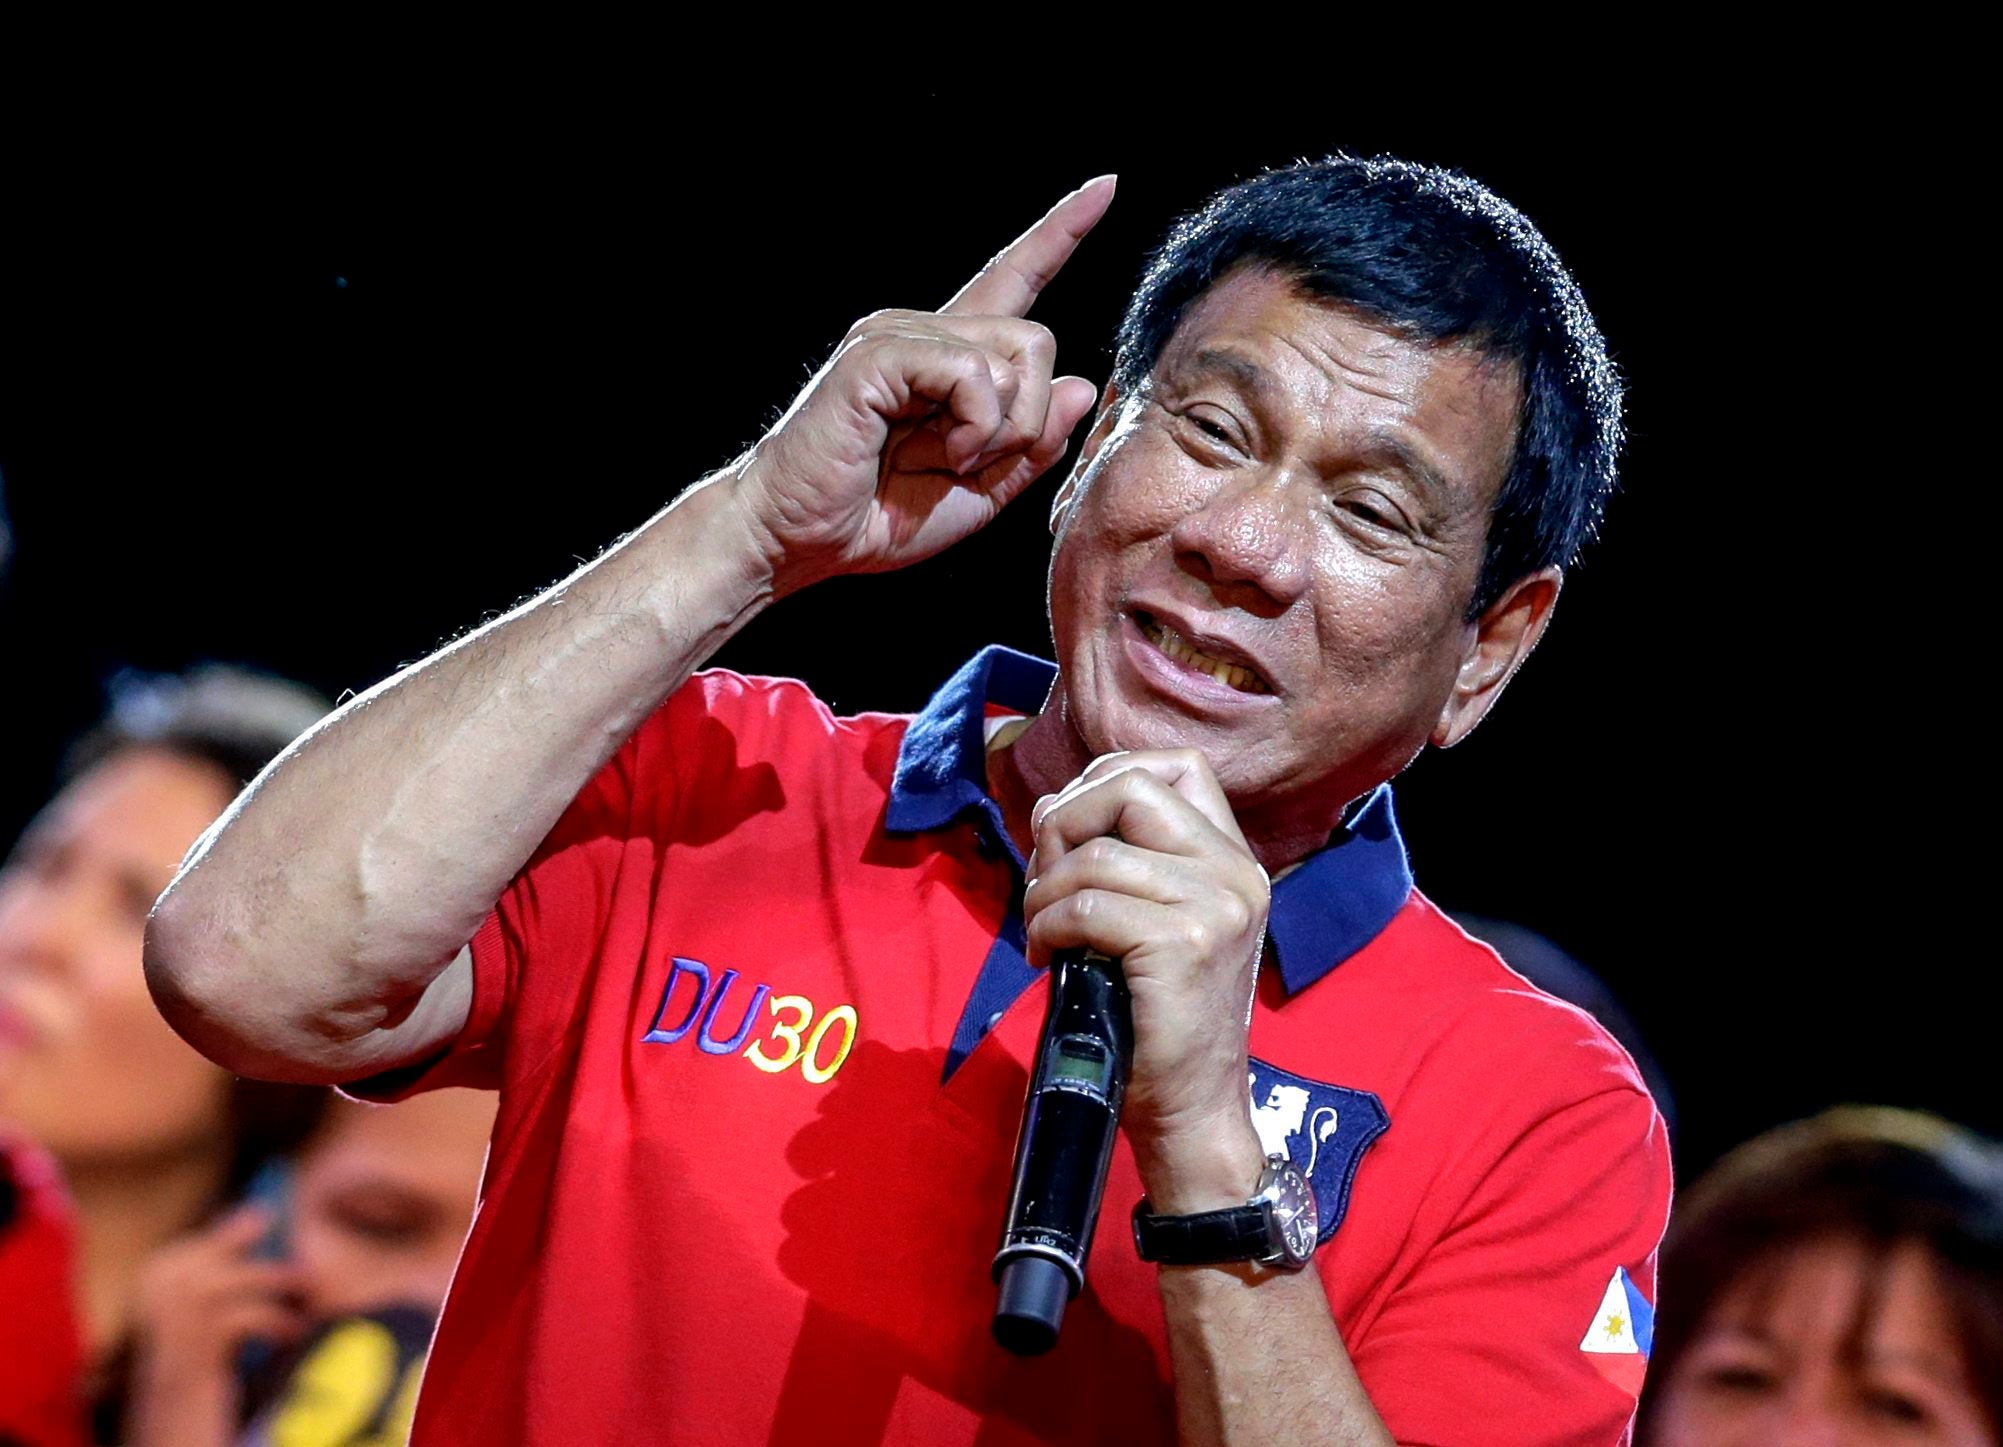 Philippine President-elect Rodrigo Duterte speaking to supporters during a rally in Manila